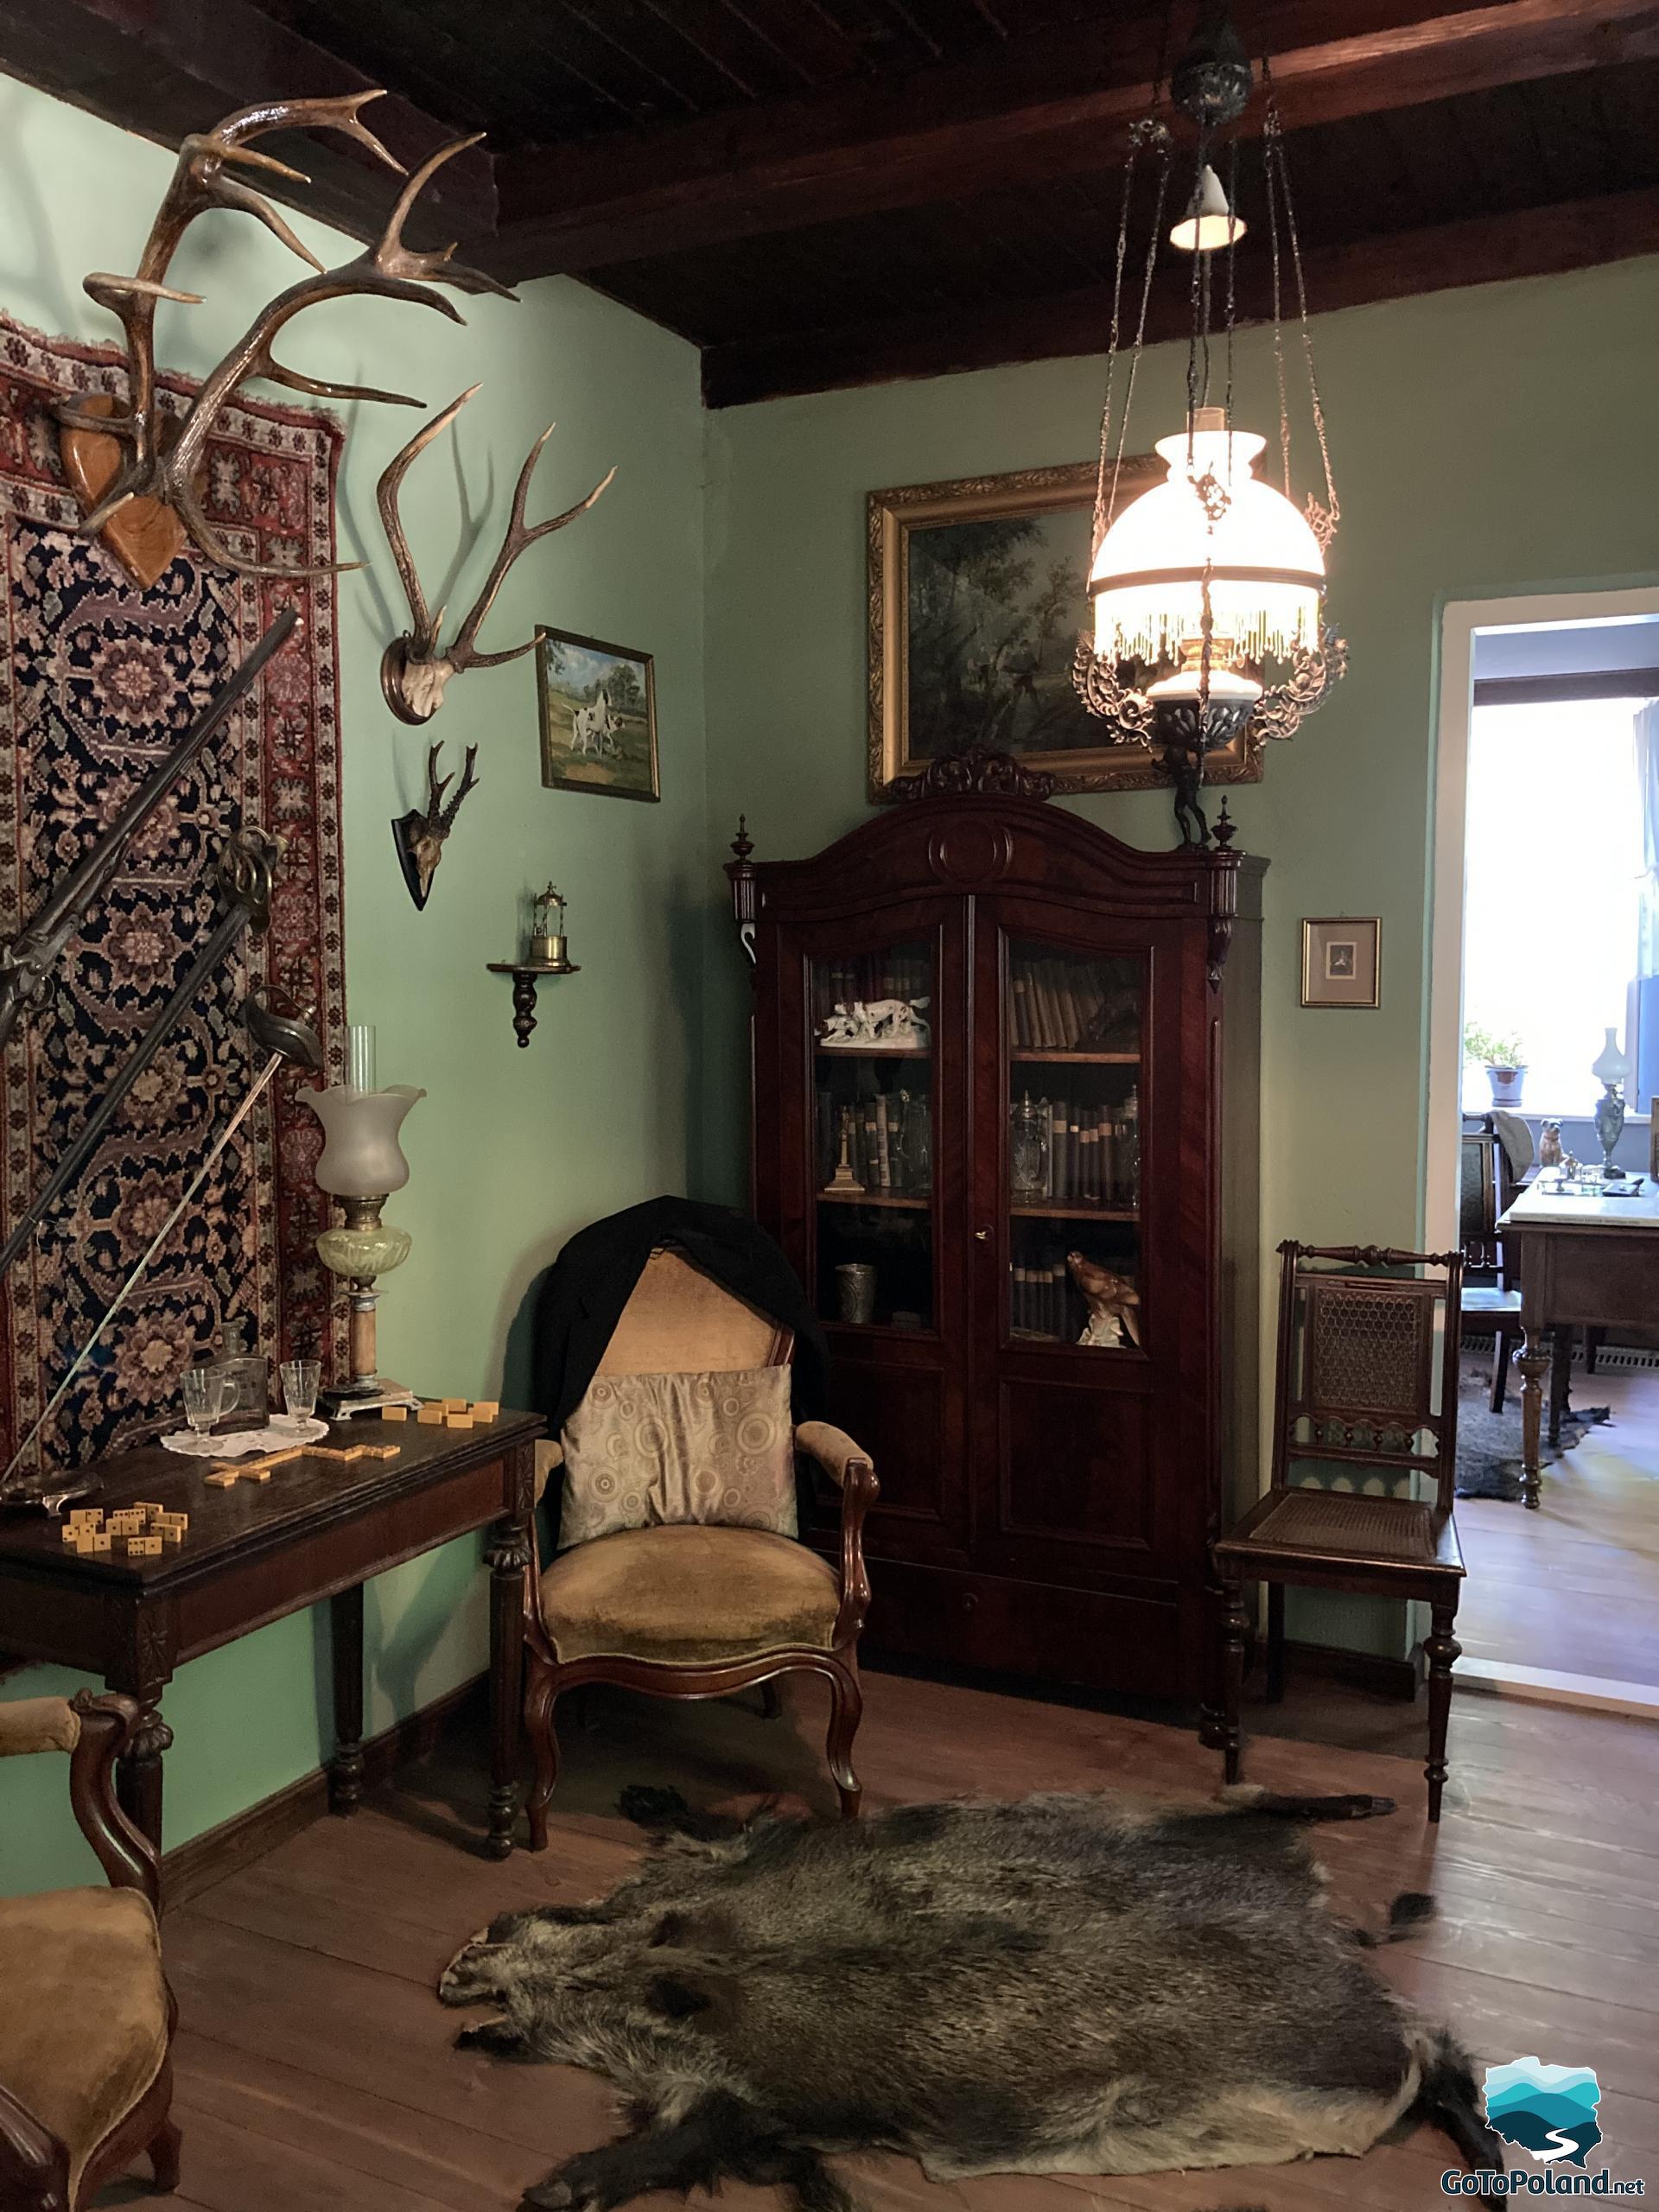 a room decorated in a hunting style, antlers hang on the wall, there is a boar skin on the floor, a lighted lamp hangs, the furniture is wooden in a dark color